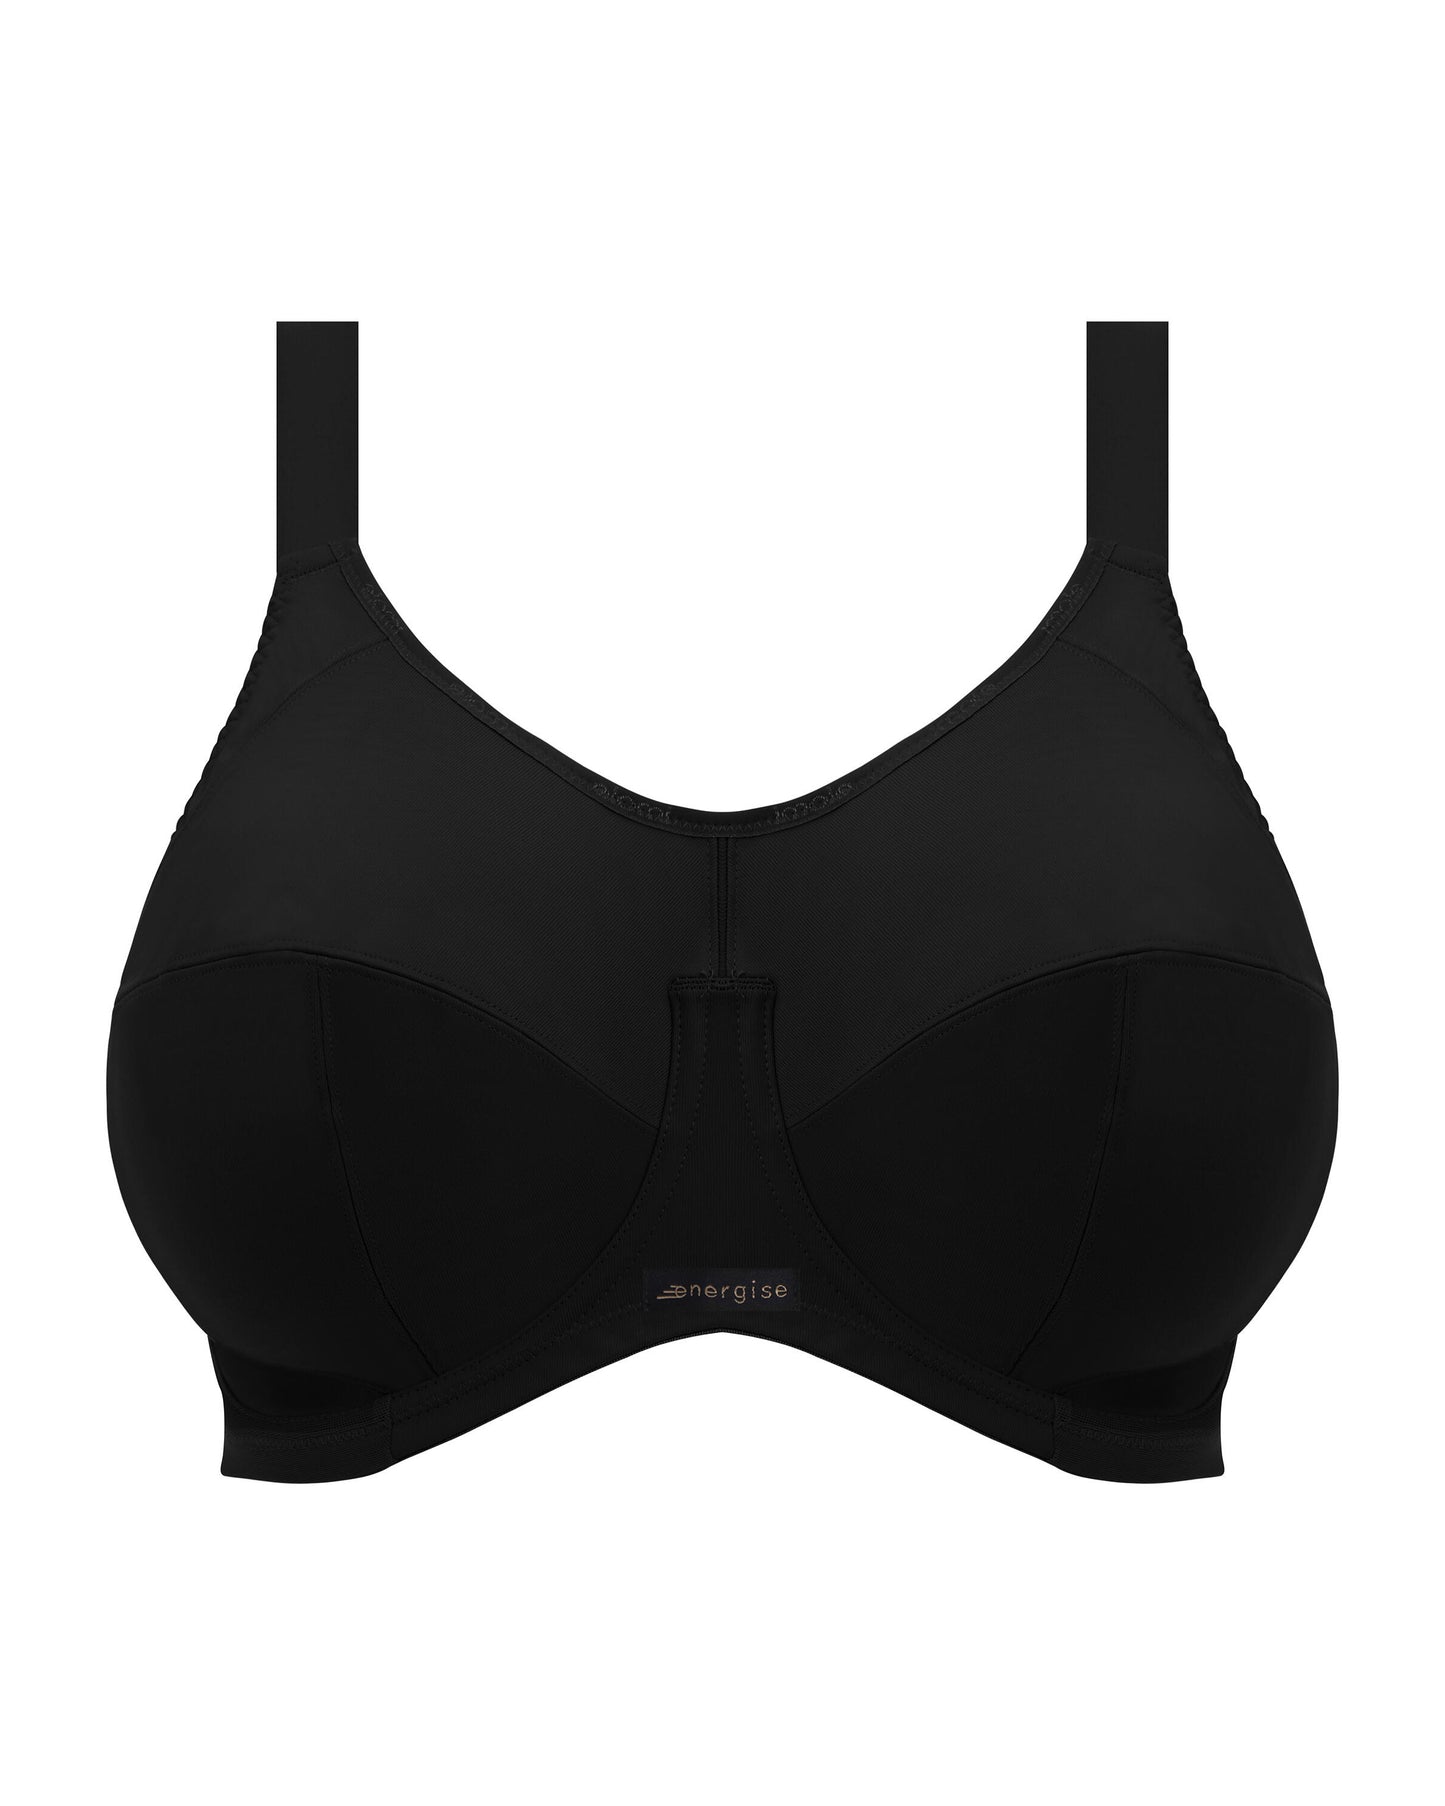 Elomi Energise Underwire Sports Bra (More colors available) - Black